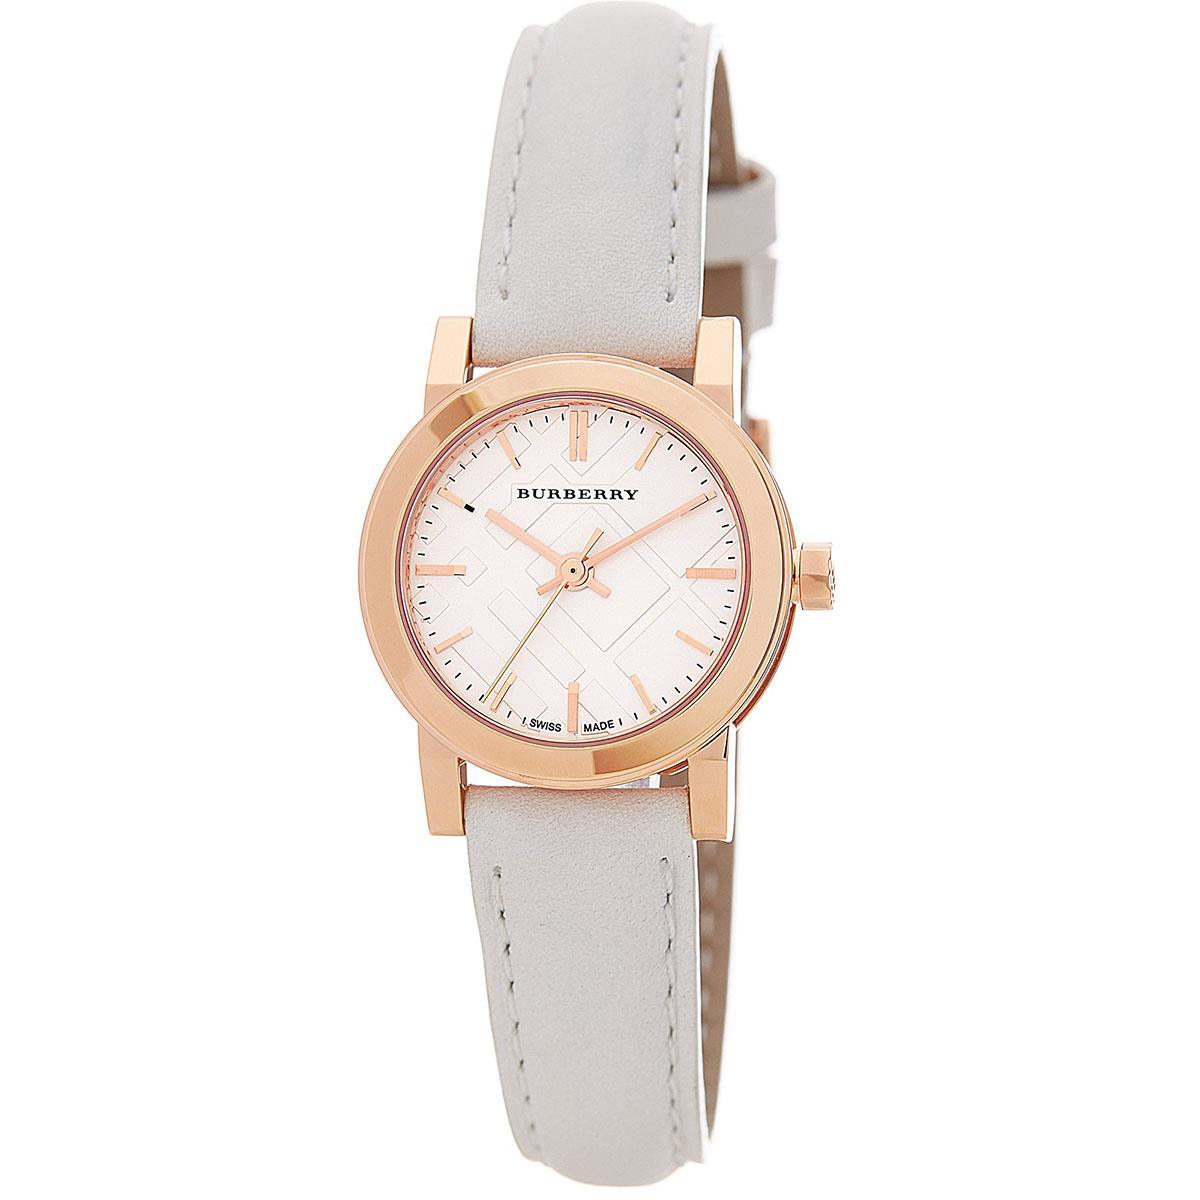 Burberry BU9209 Rose Gold Tone White Leather Women's Watch - Watch Home™